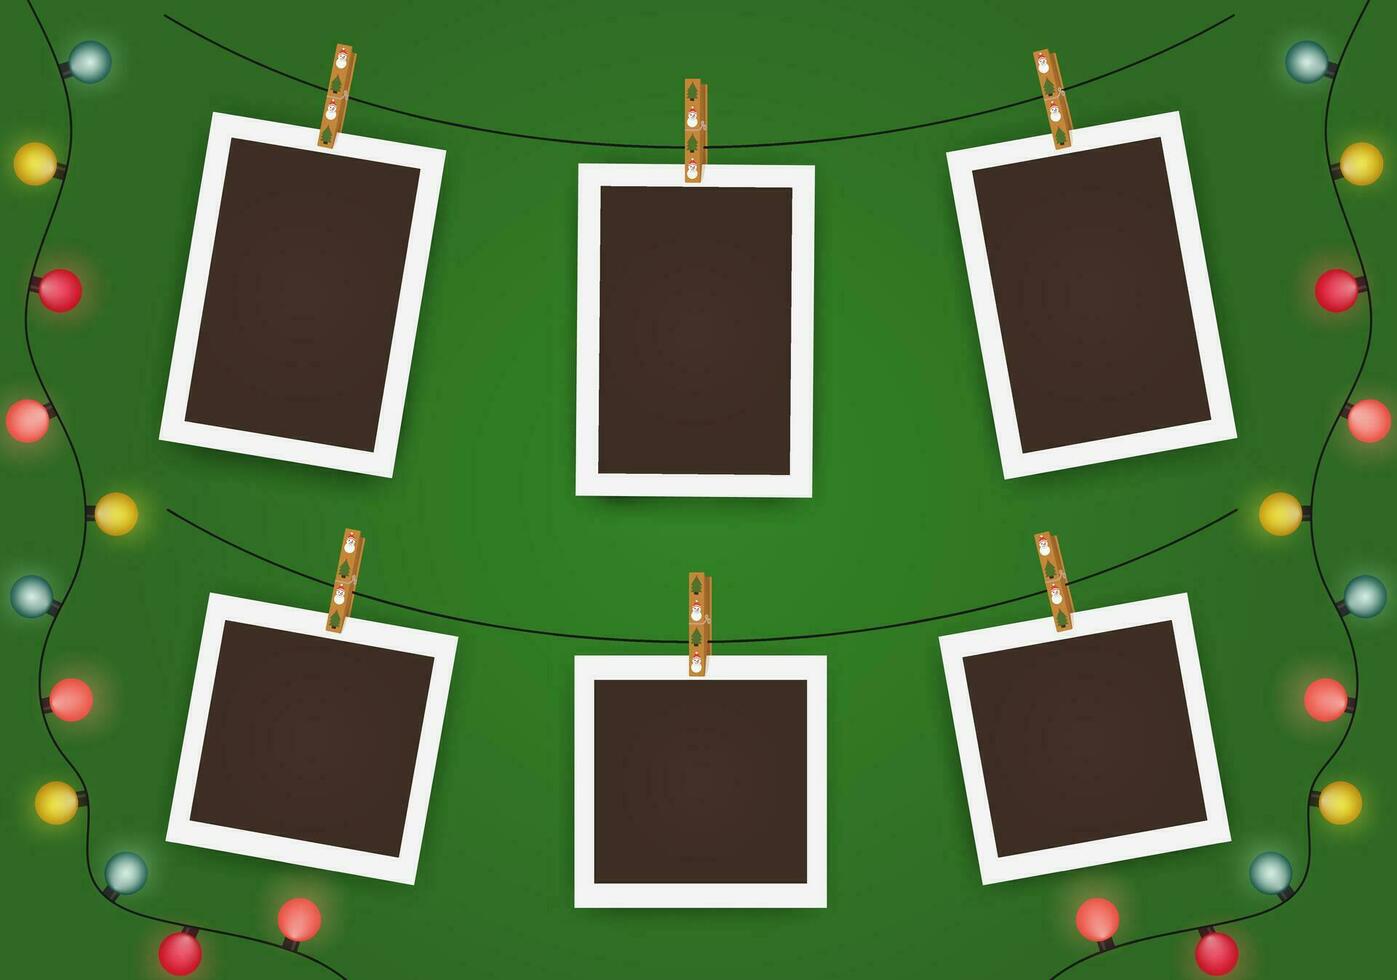 Christmas empty photo frame mockup with lights, tree and snowman. New Year realistic Scrapbook vector illustration on green background. Xmas blank framework picture template with shadows.